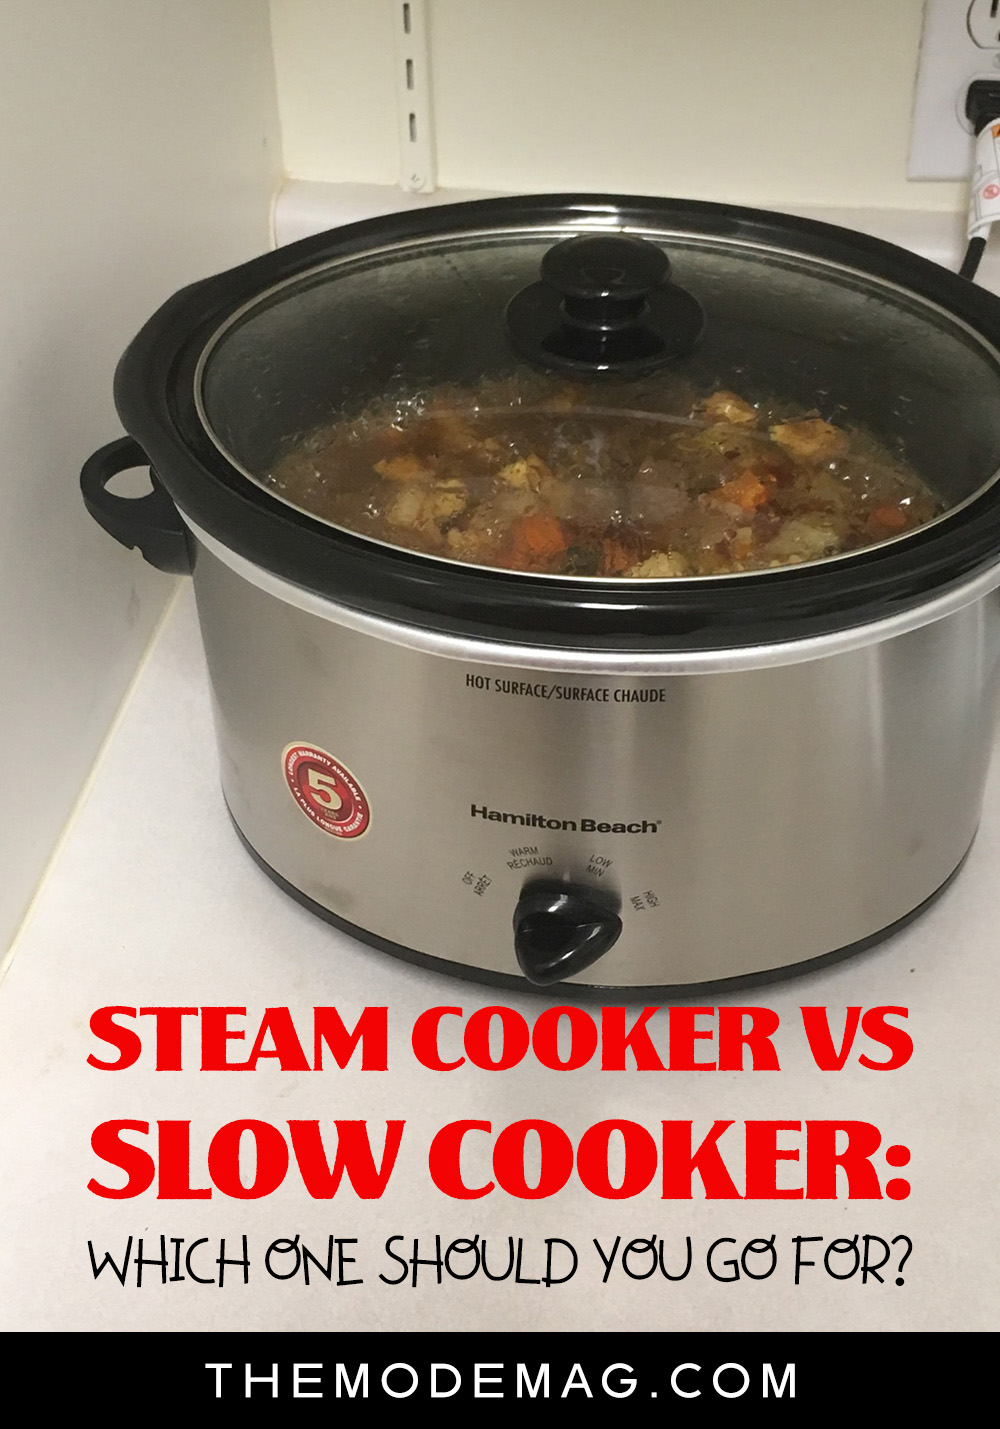 Steam Cooker vs Slow Cooker: Which One Should You Go For?